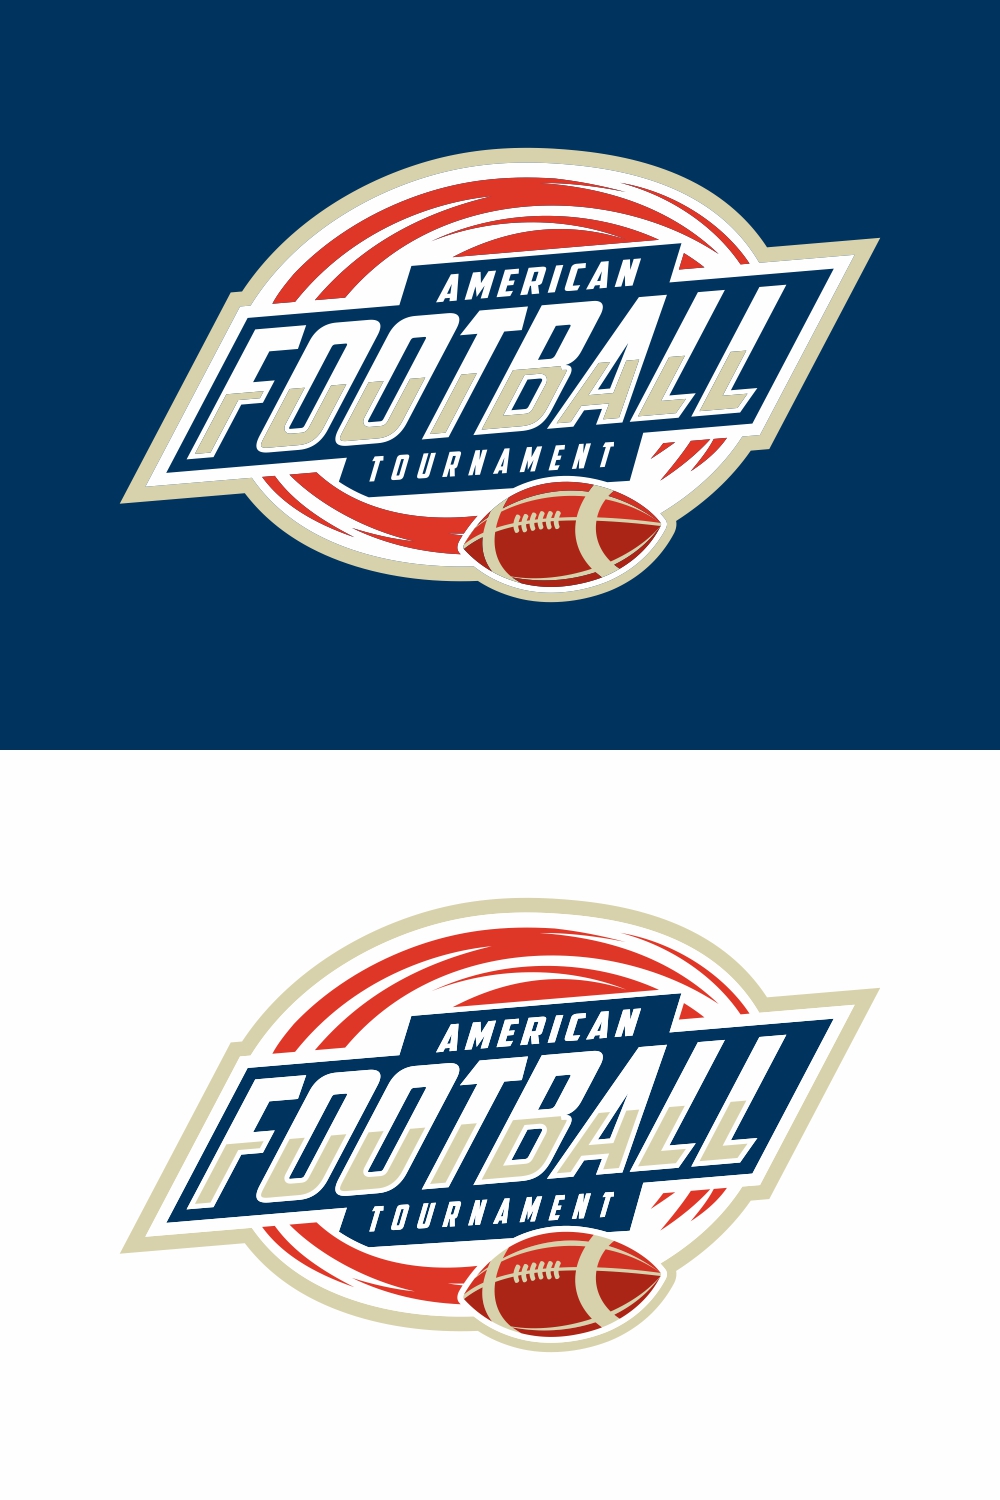 American Football Sports logo and badge – Only $7 pinterest preview image.